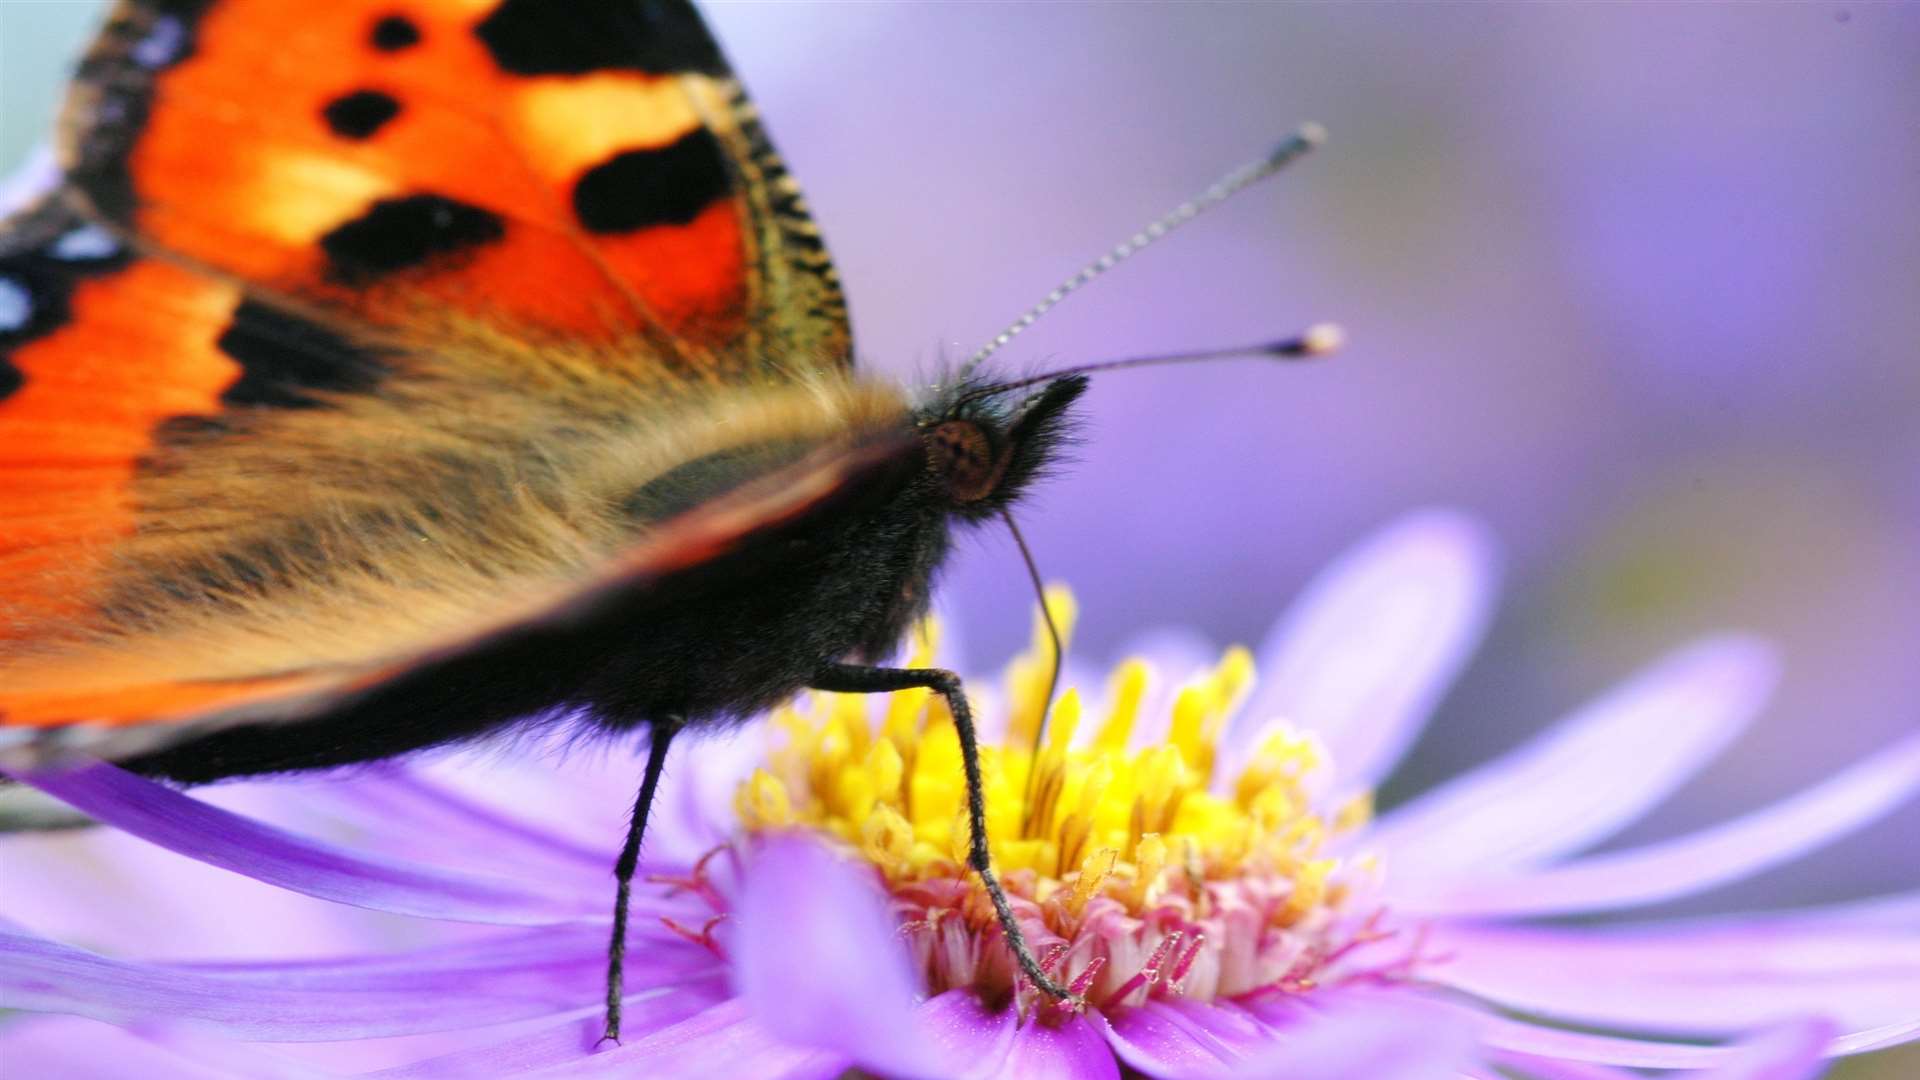 The small tortoiseshell is one of our most-familiar butterflies, appearing in gardens throughout the country